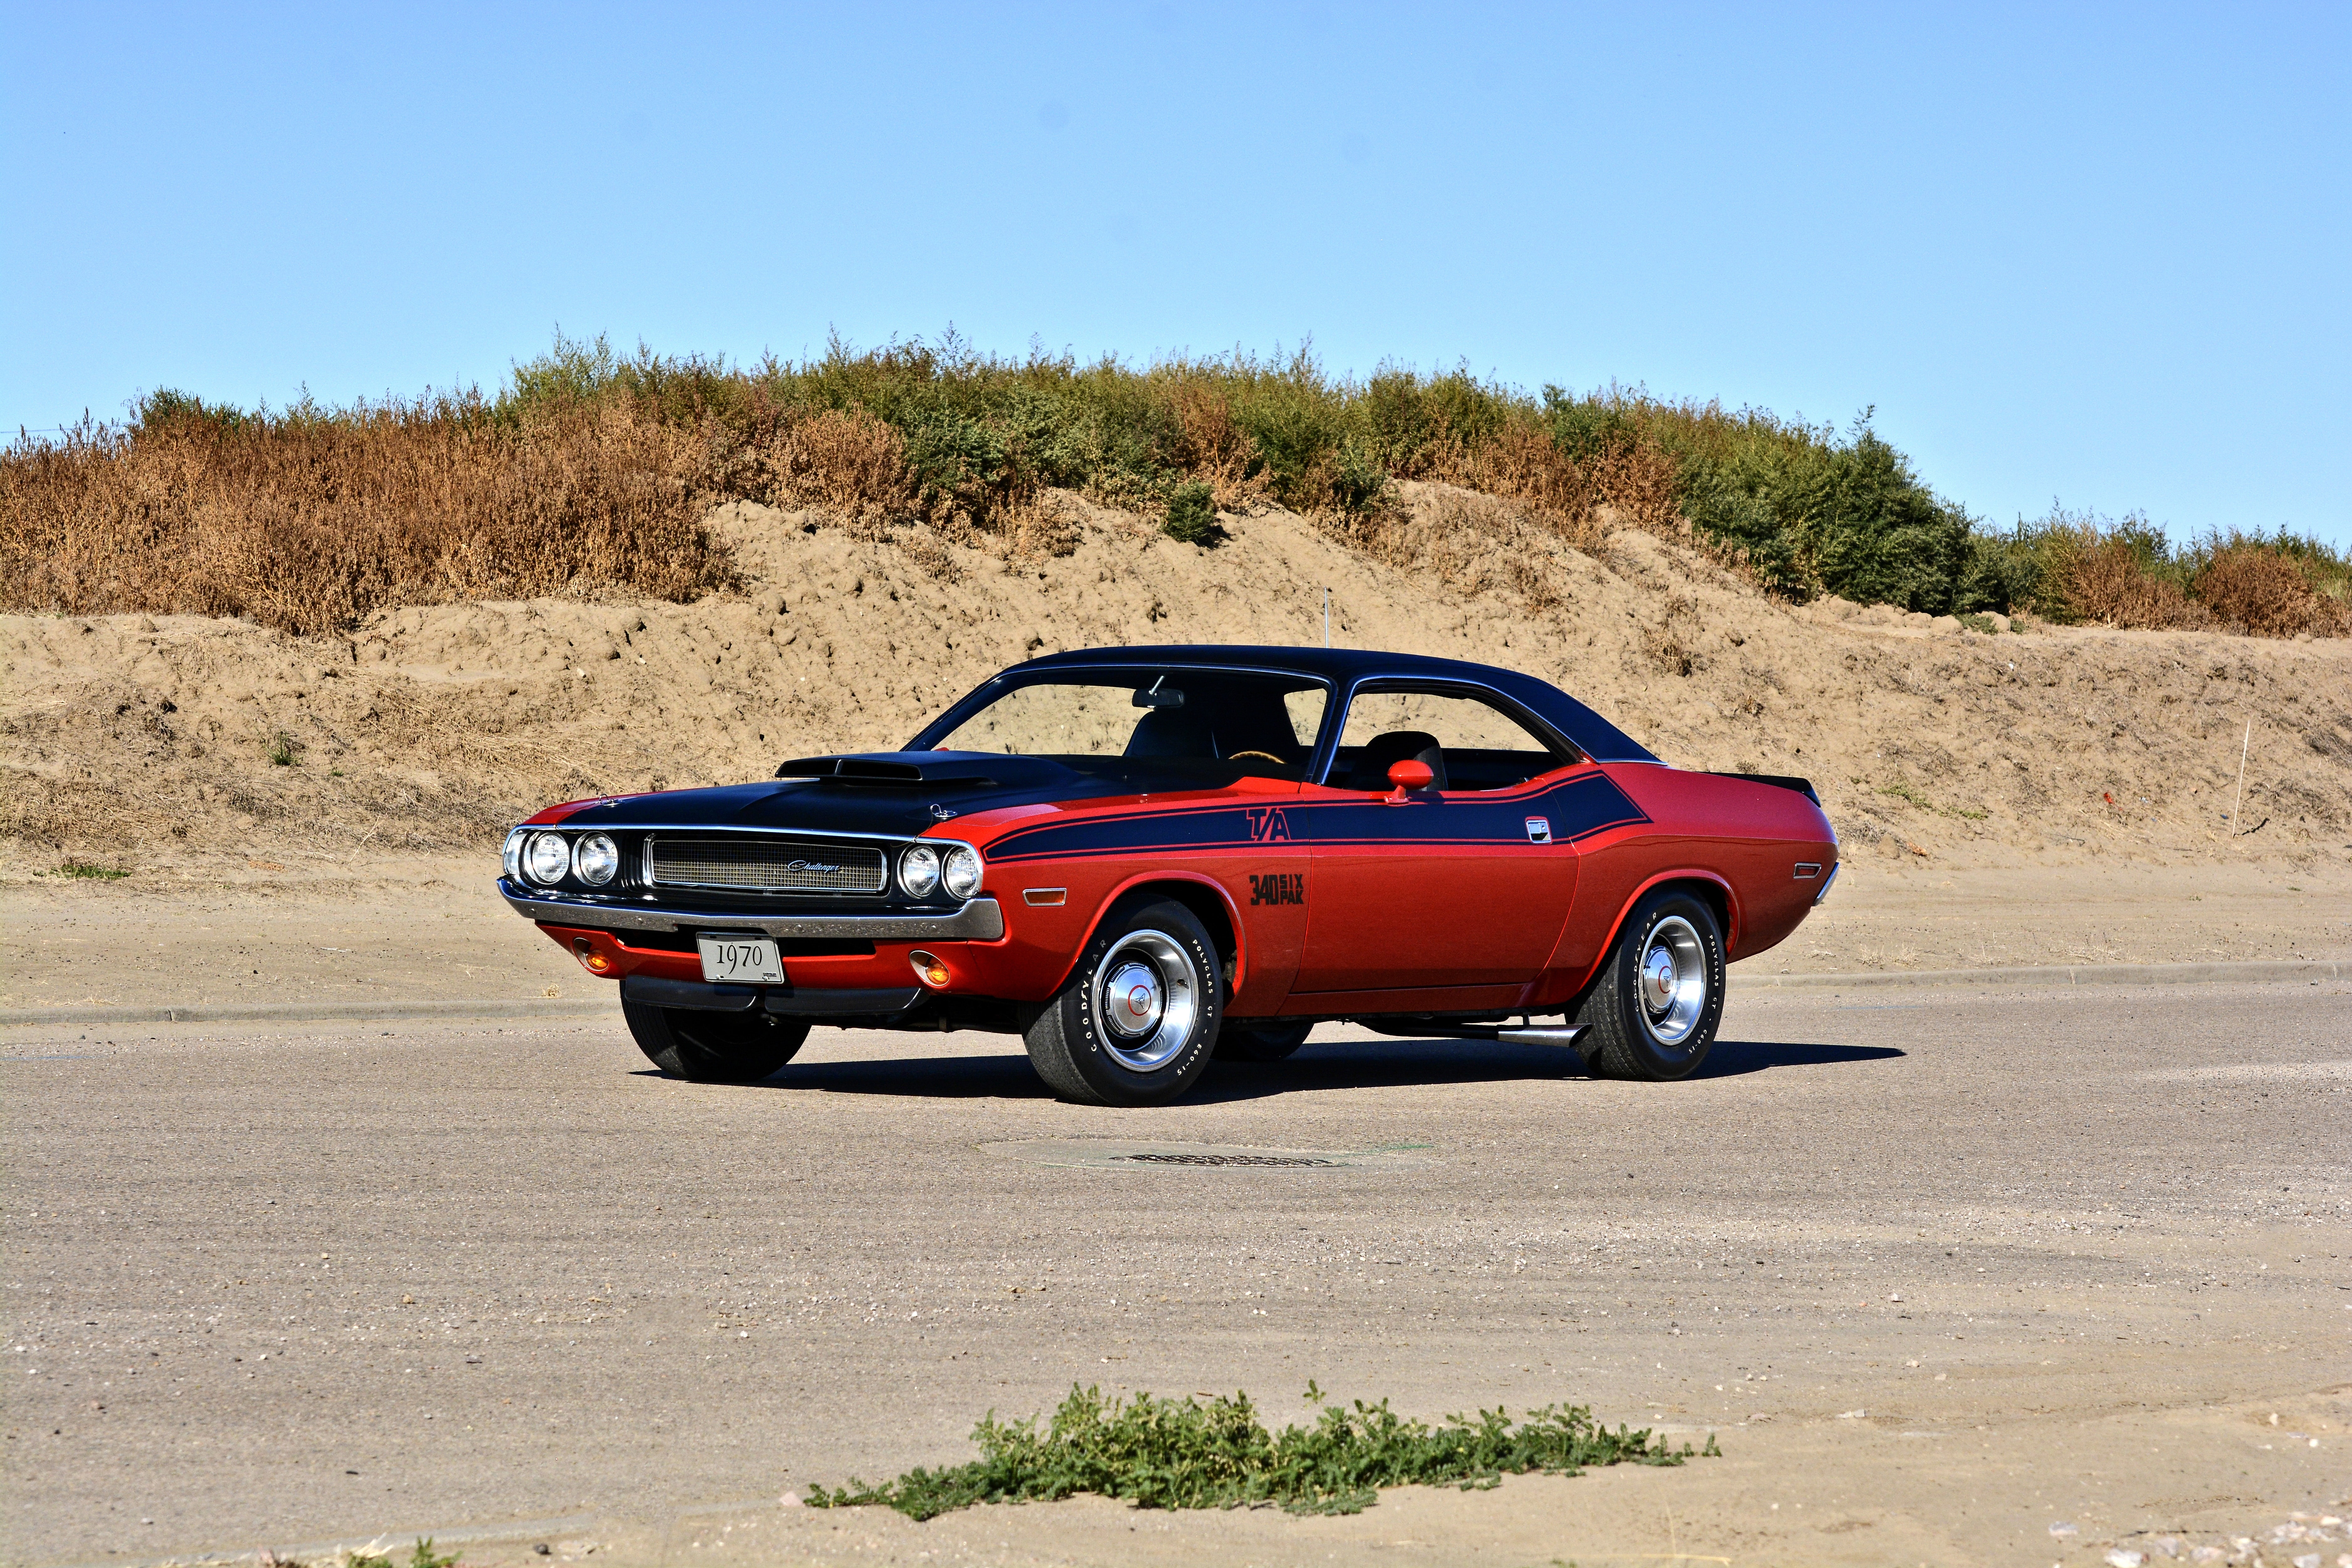 1970, 340, challenger, classic, dodge, muscle, old, original